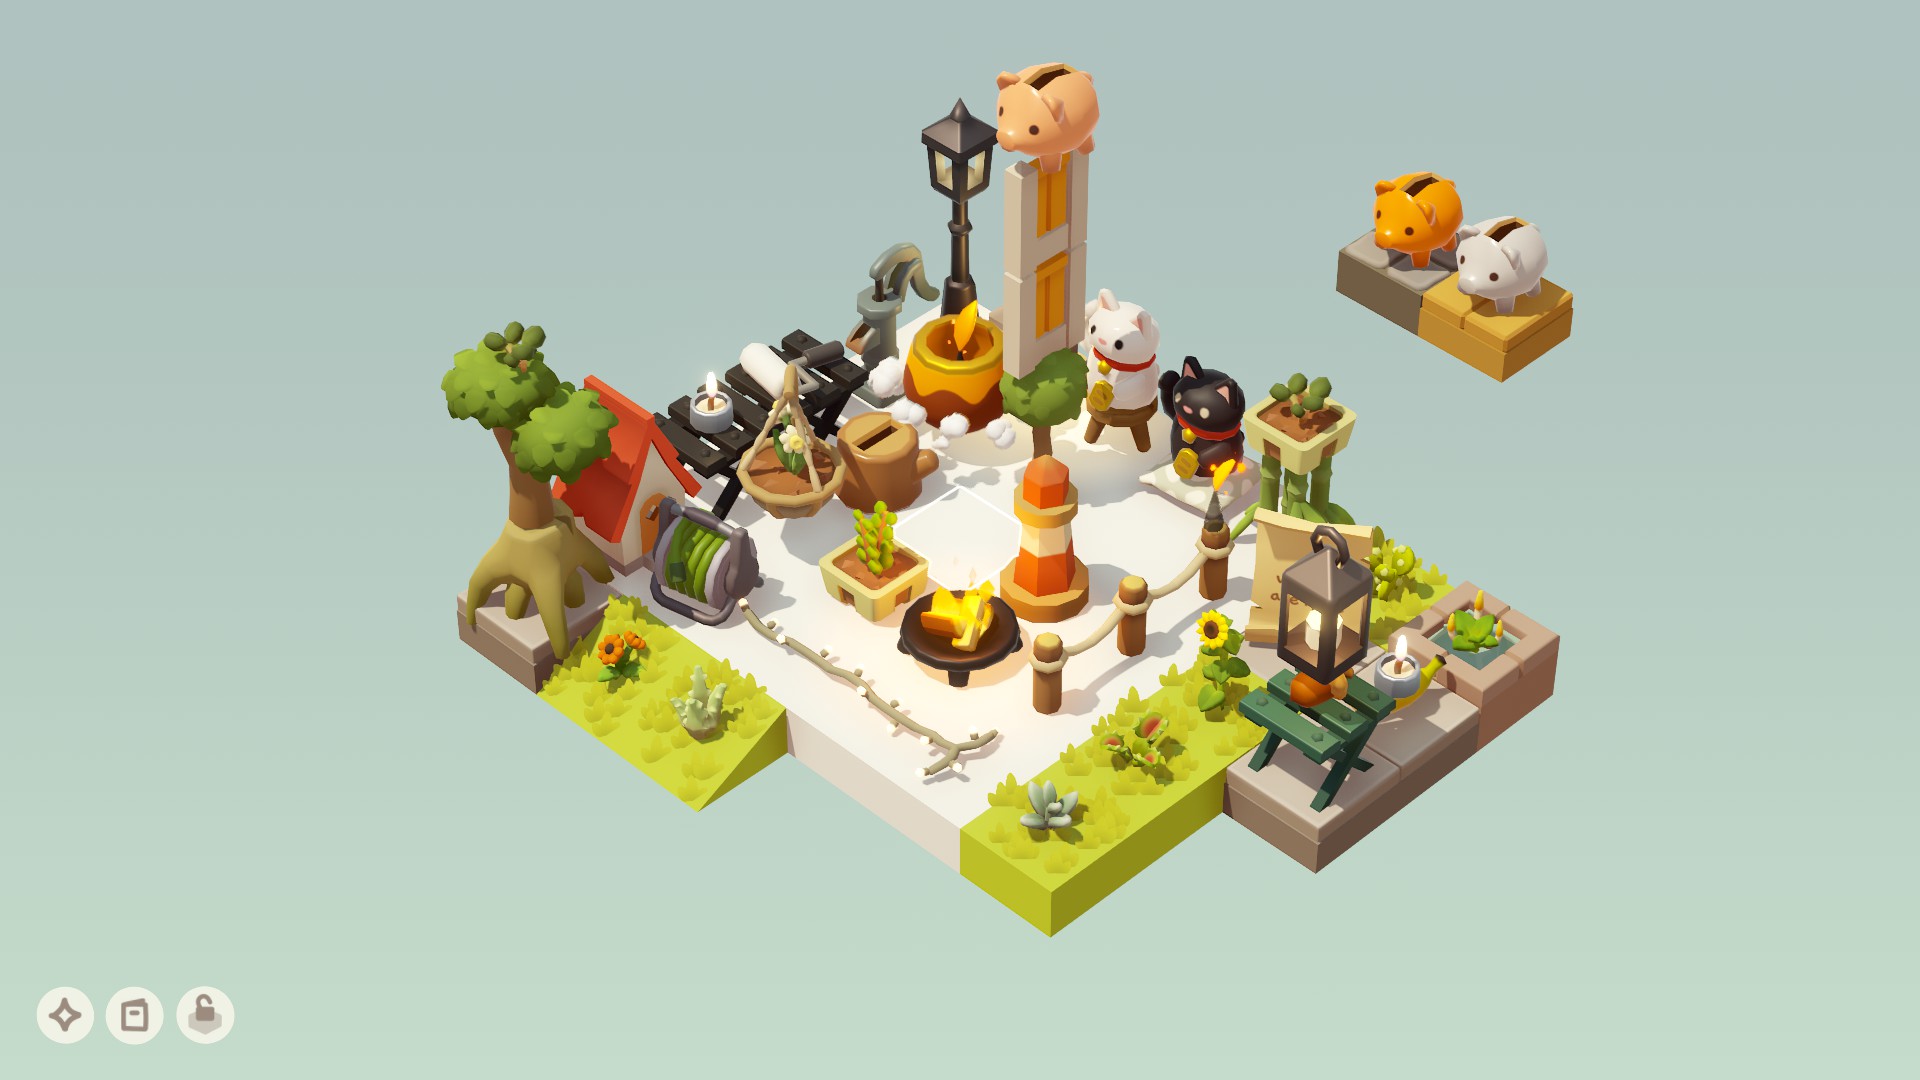 Screenshot from Garden Galaxy. There are a few more white ground tiles, and most surfaces are covered with various random items including piggy banks, becking cat statues, a streetlapm, a water pump, a lighhouse, a tree, a lantern, several small plants, and a tiny house.